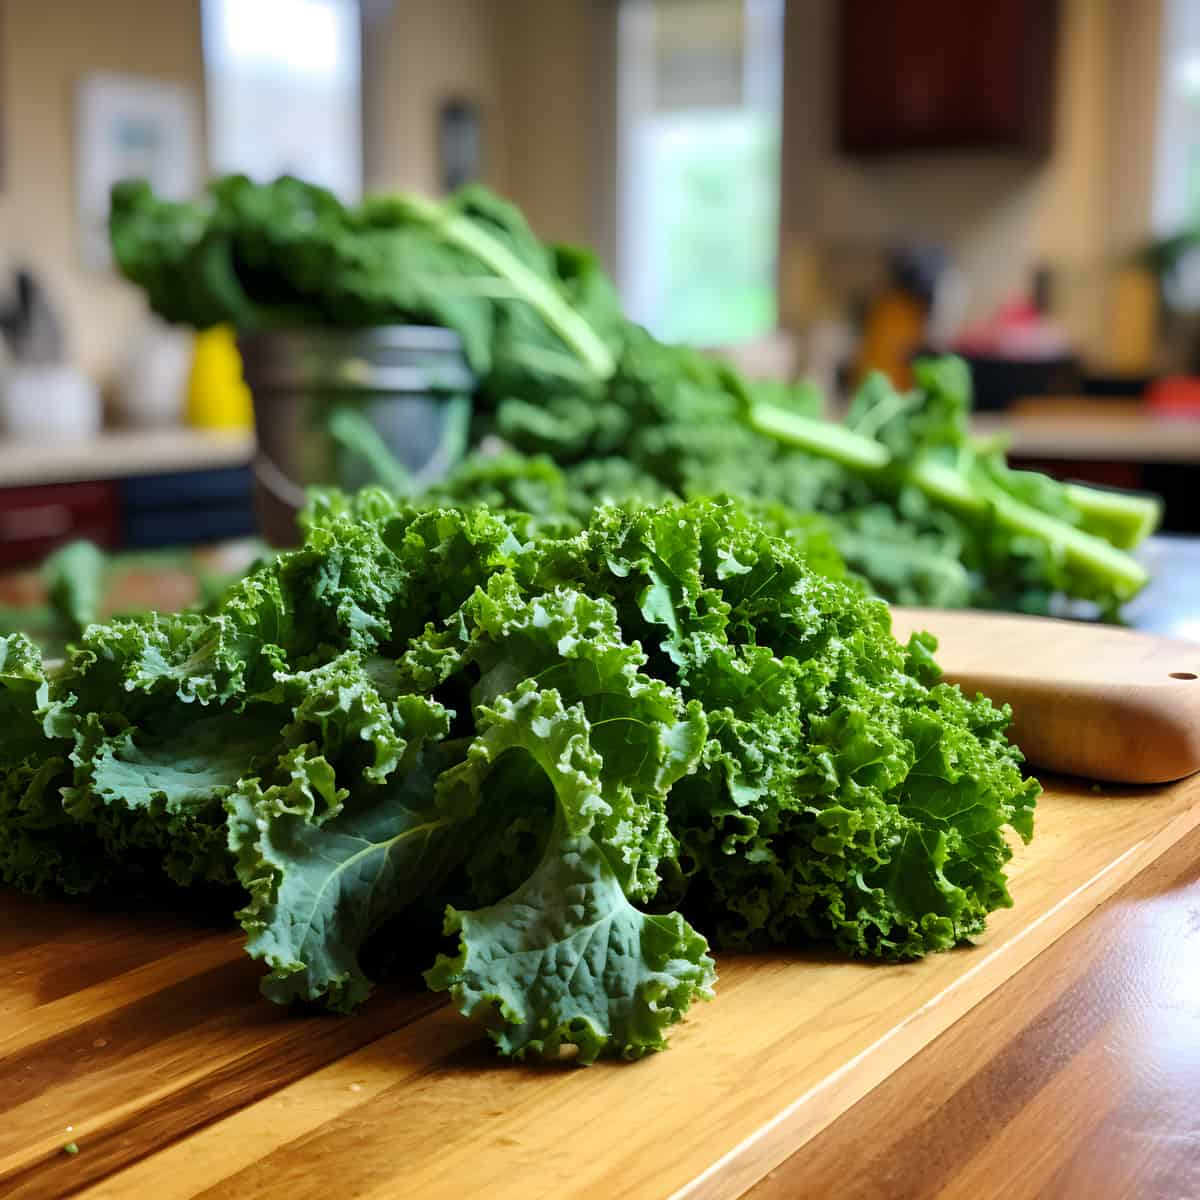 Kale on a kitchen counter